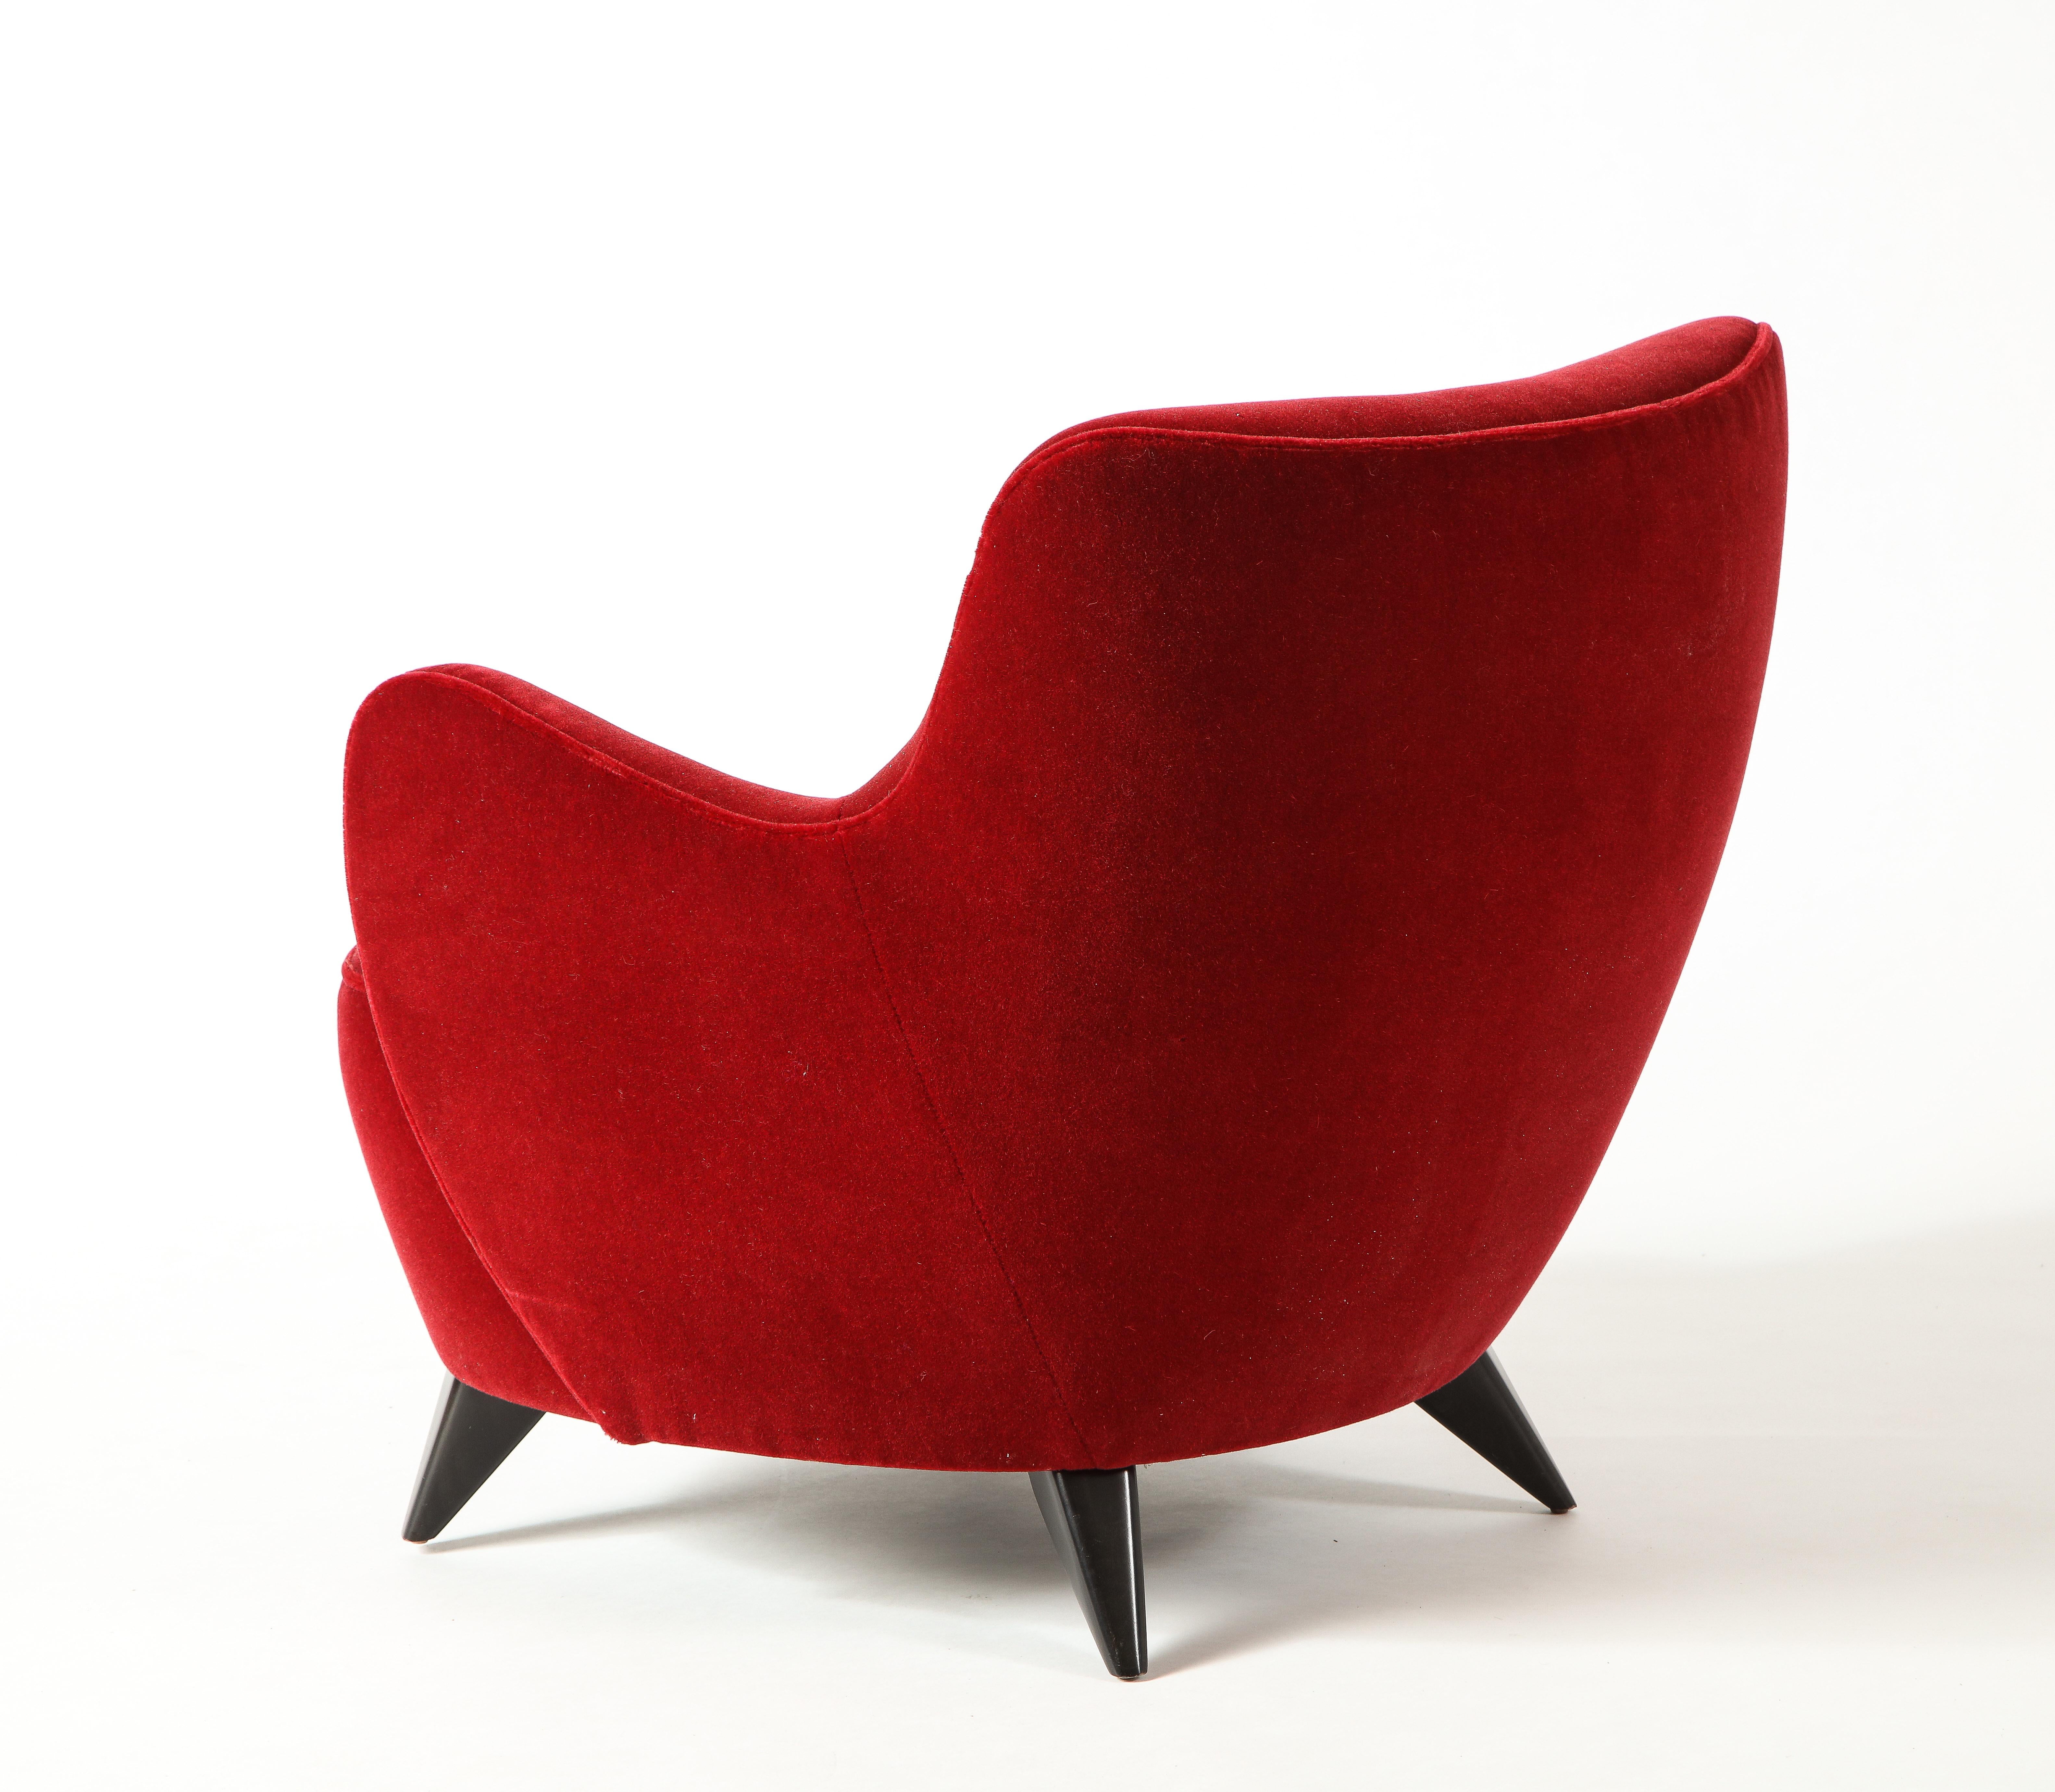 American Vladimir Kagan Barrel Chair in Red Mohair Upholstery with Ebony Base